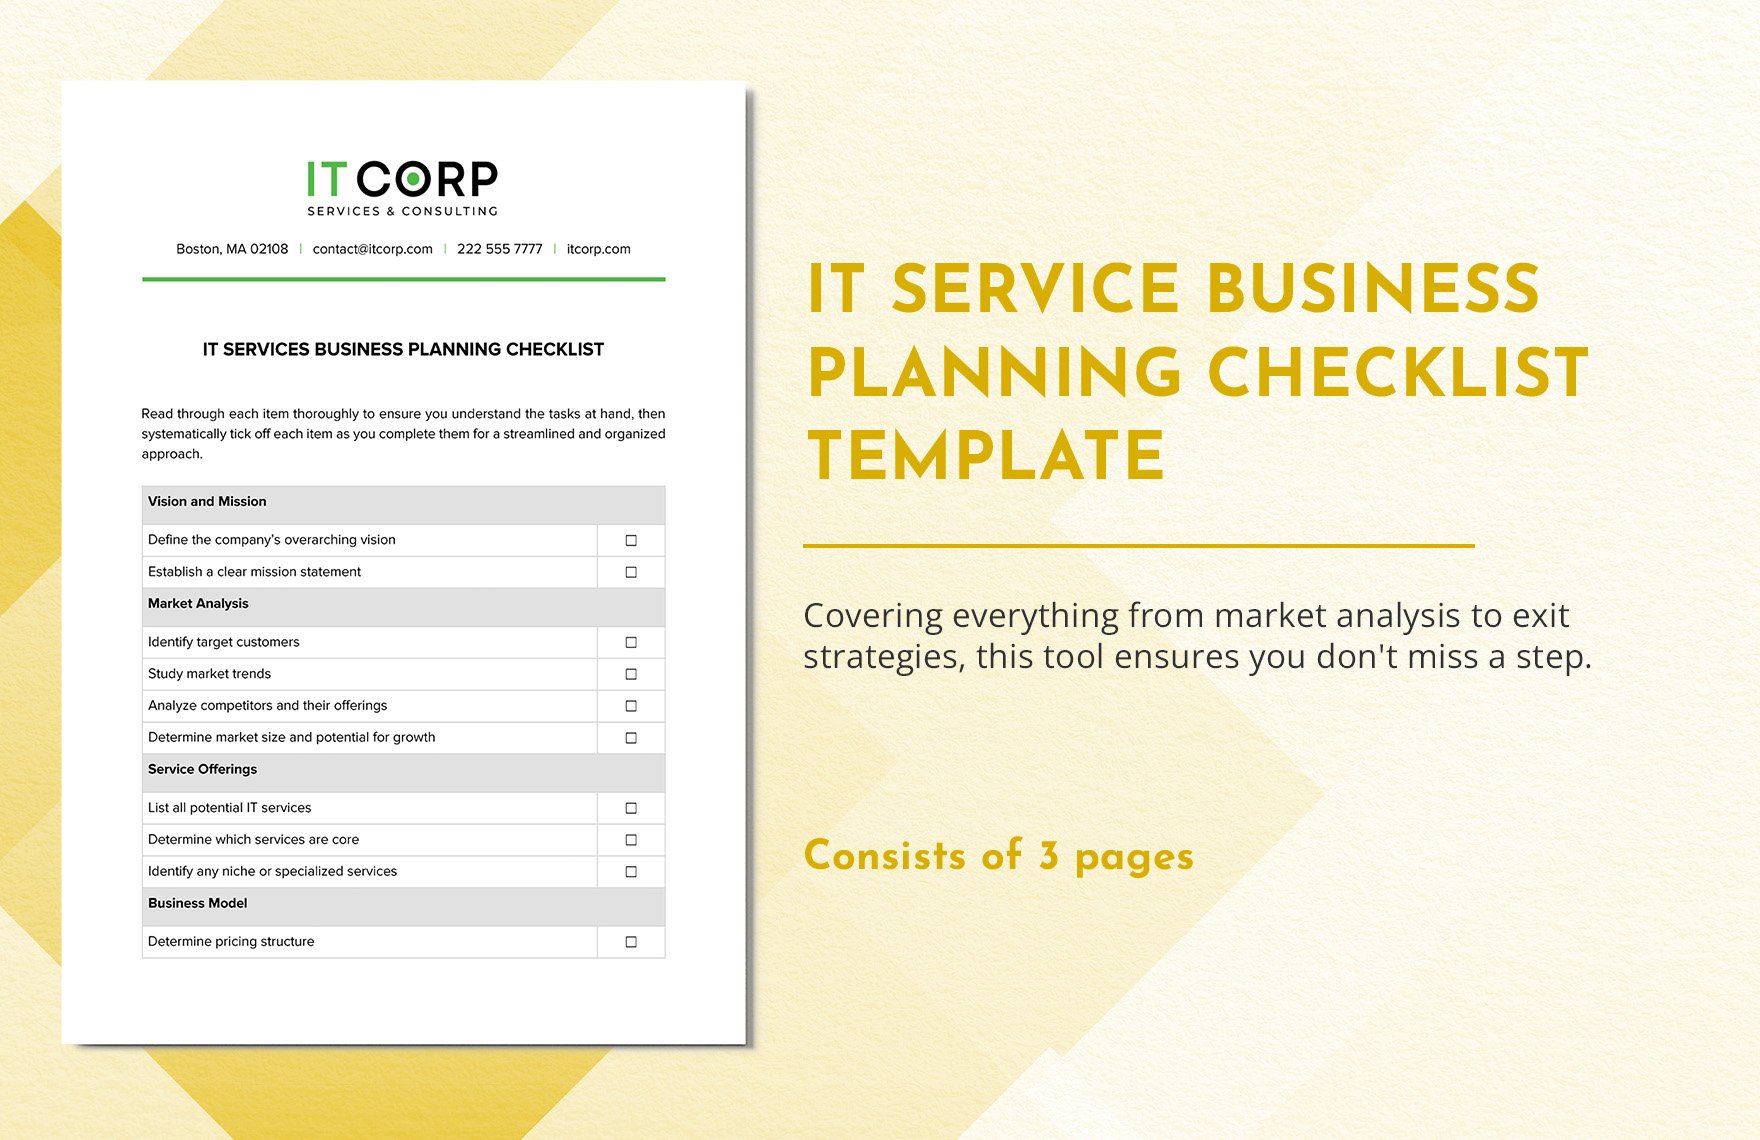 IT Service Business Planning Checklist Template in Word, Google Docs, PDF